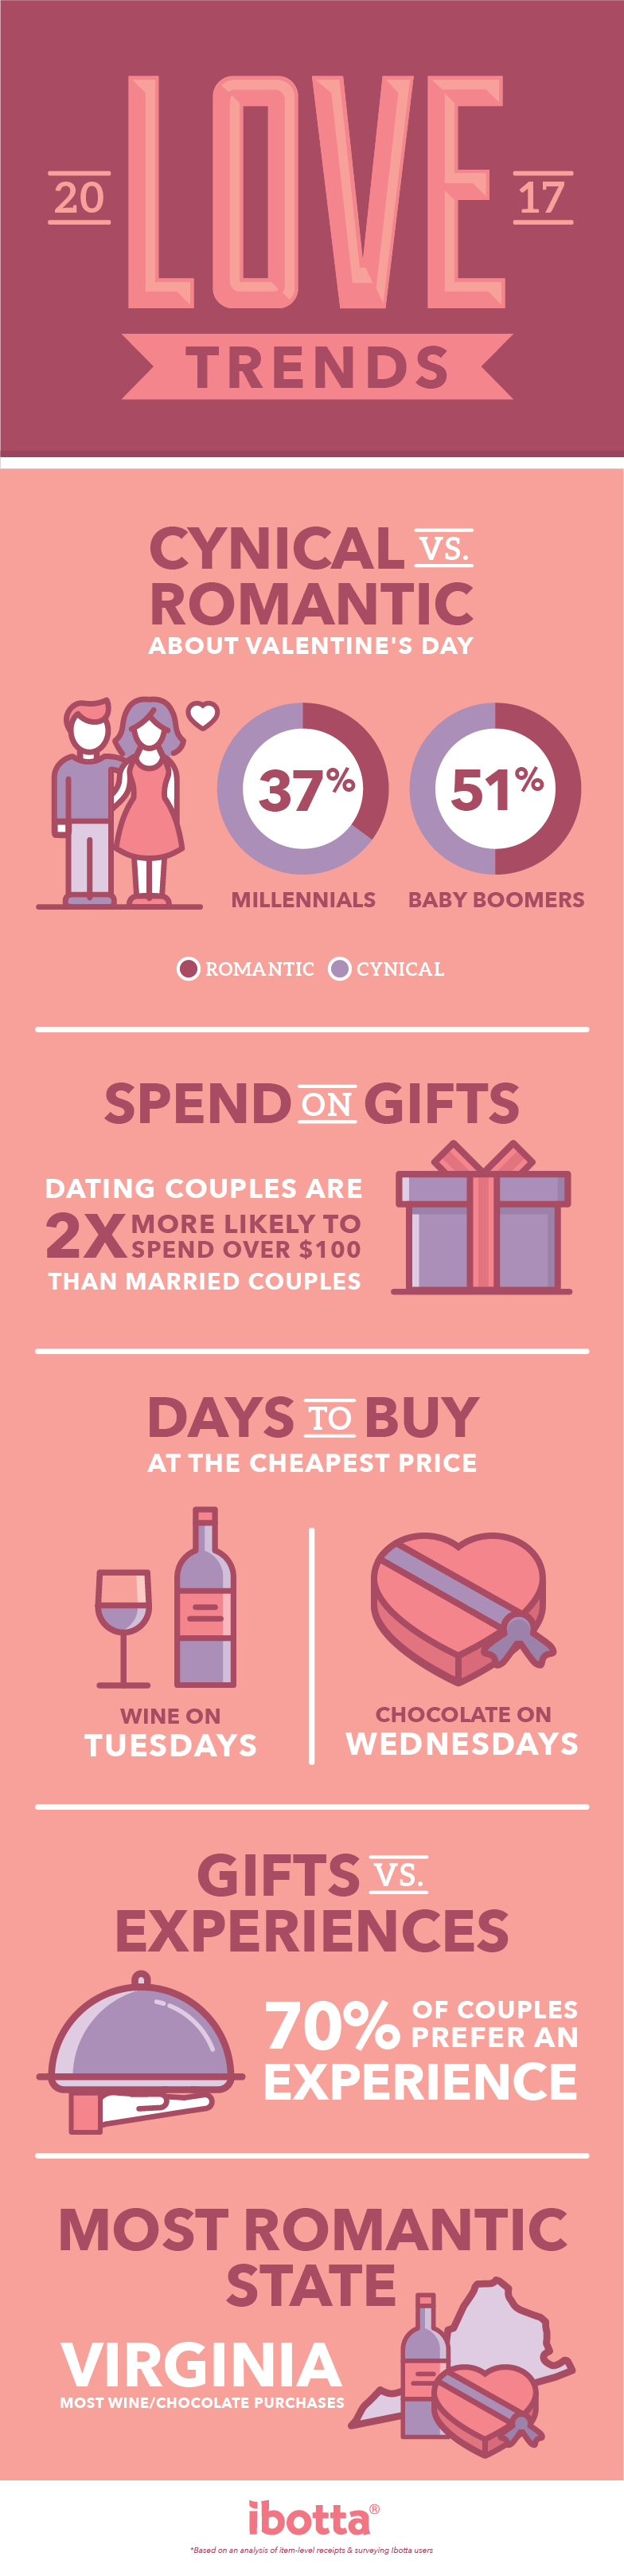 love-trends-infographic 2017